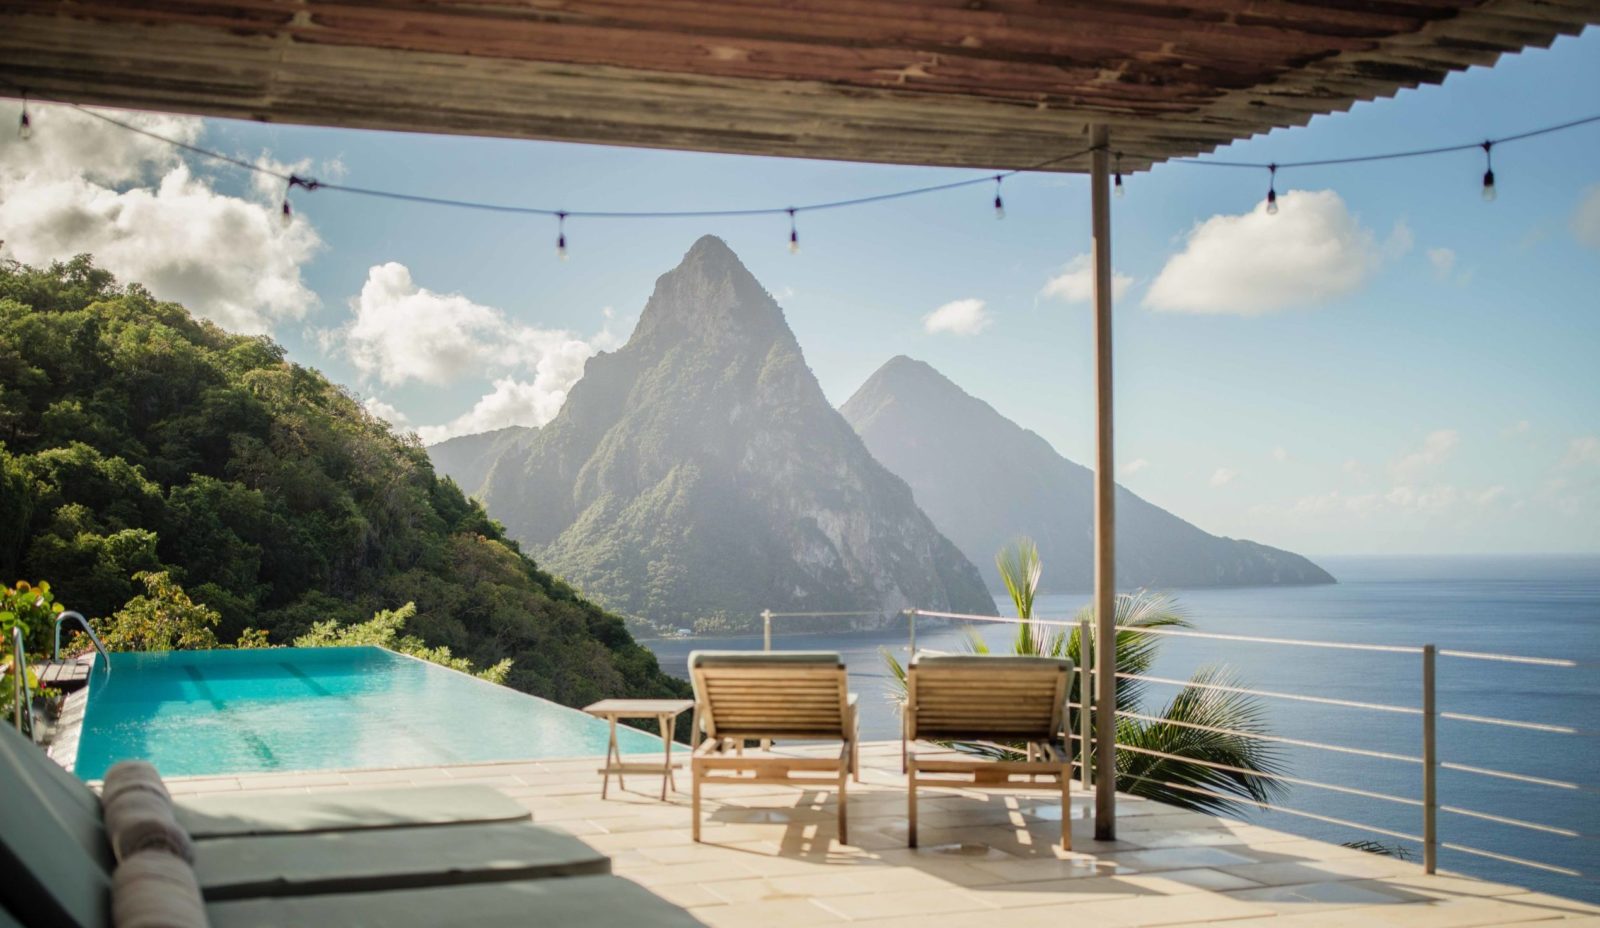 Sunloungers on the terrace at Cosmos St Lucia are shaded by a wooden canopy and look out onto the Pitons